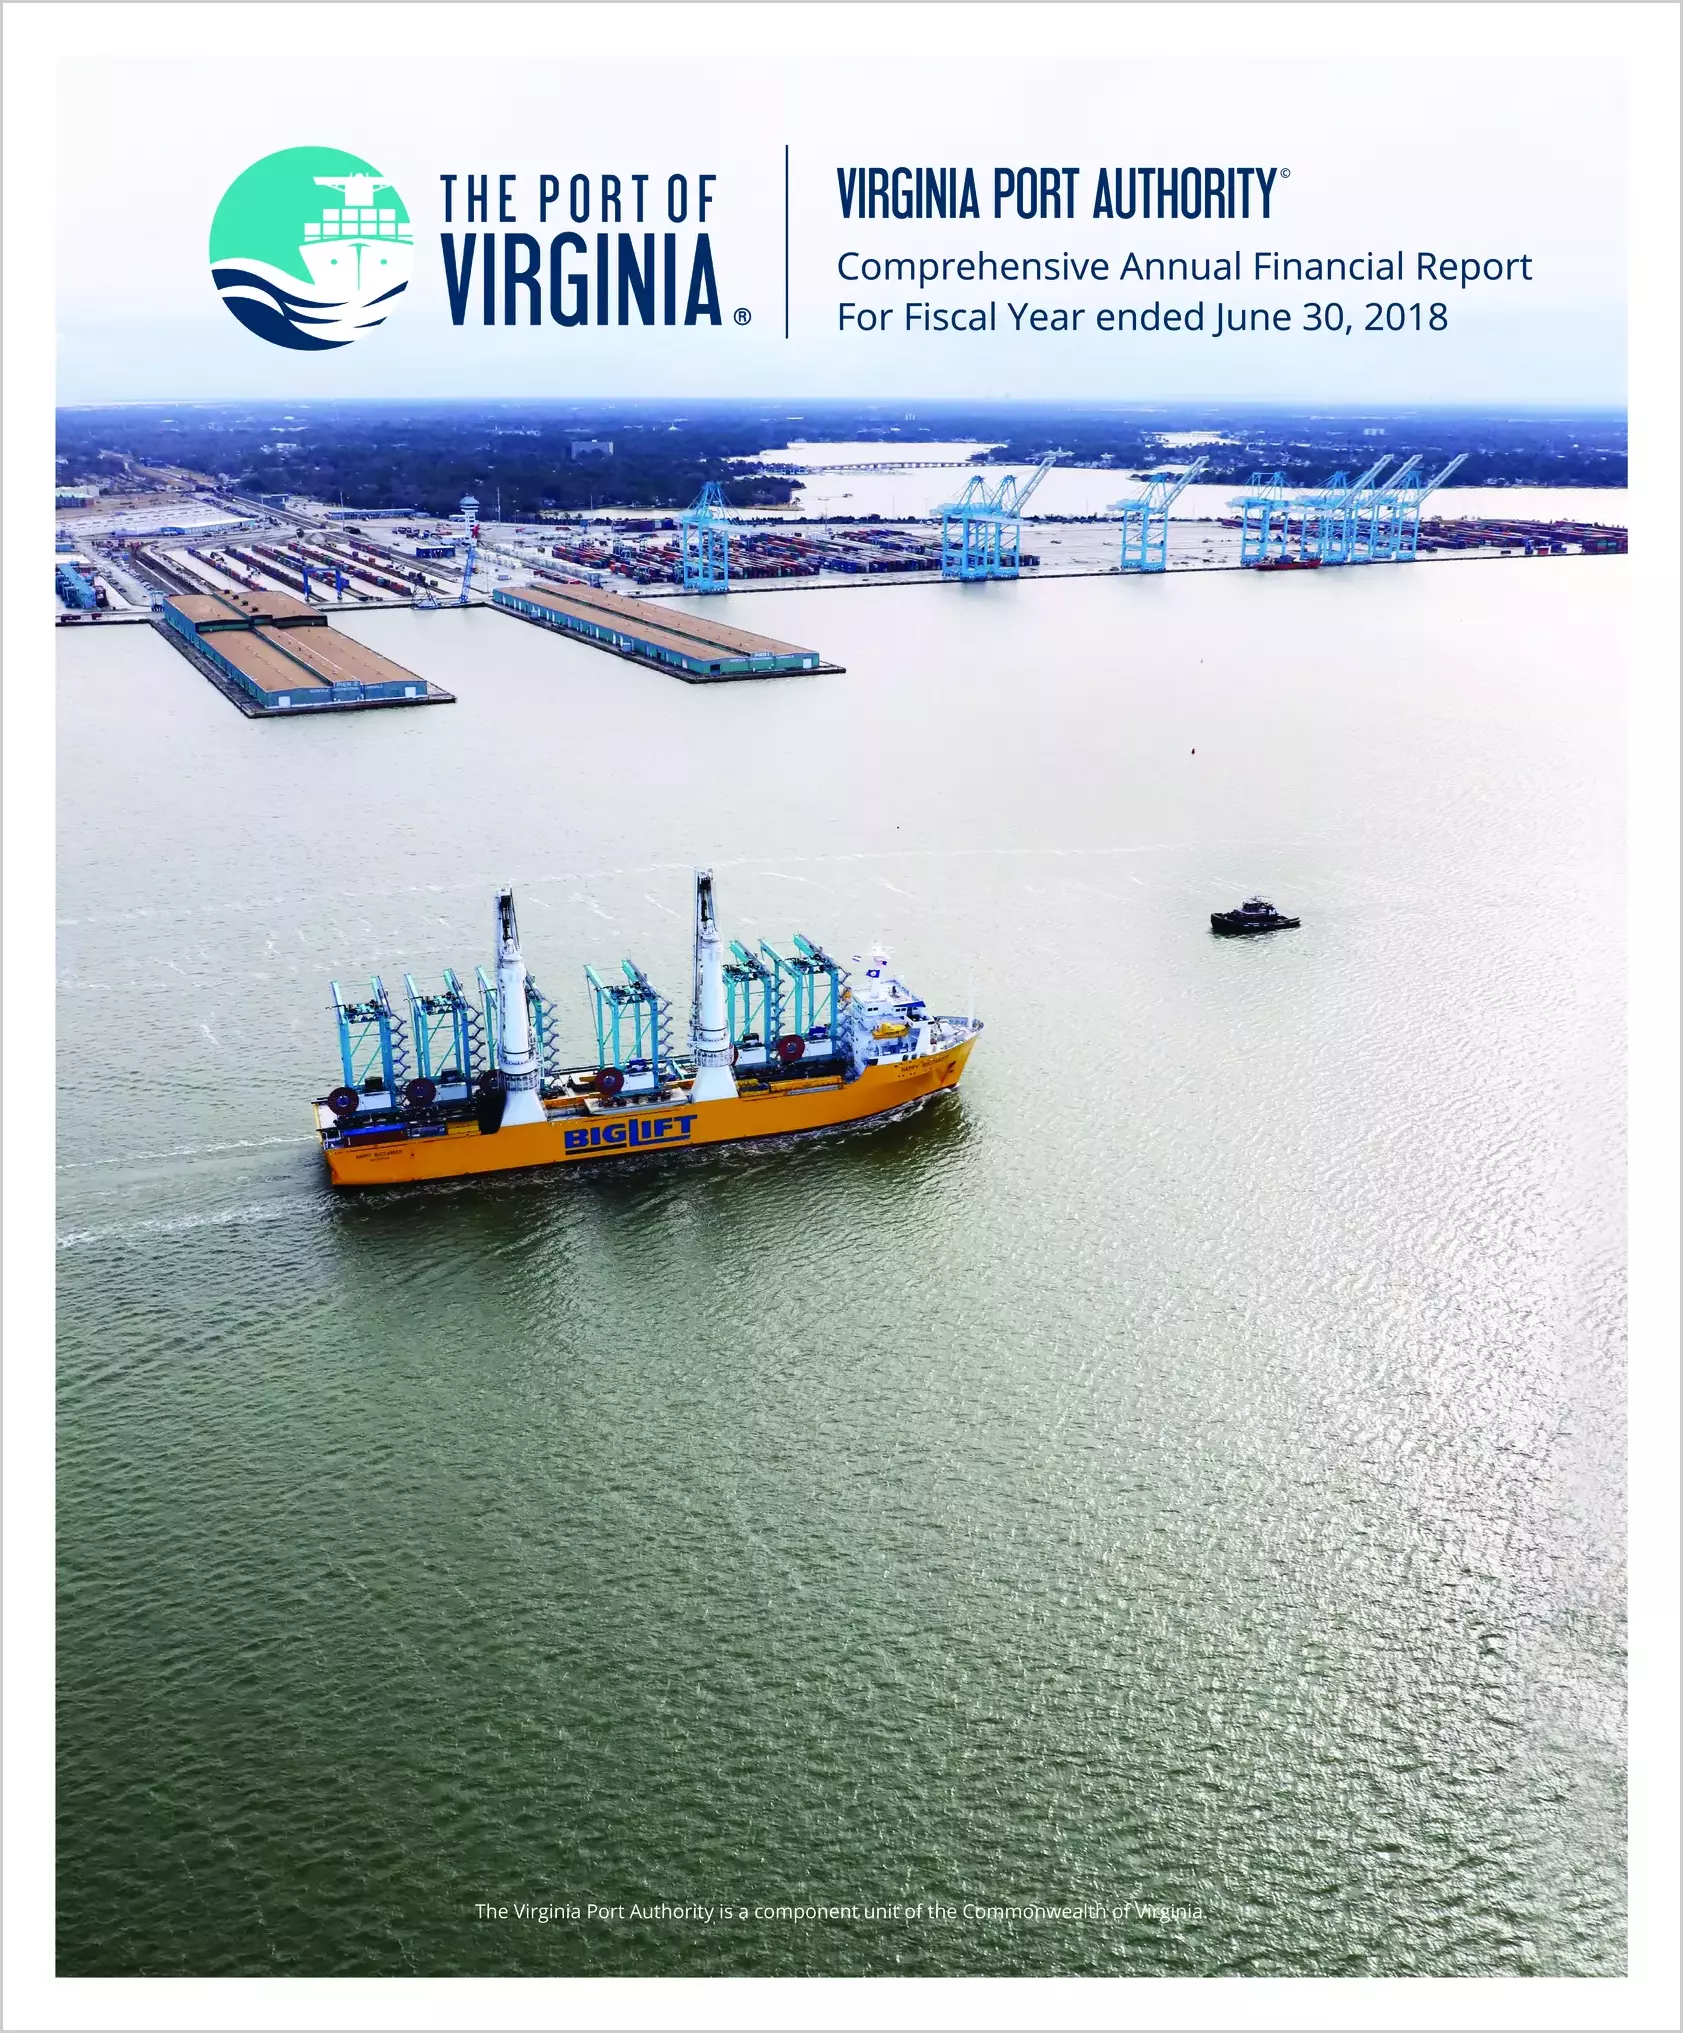 Virginia Port Authority Financial Statements for the year ended June 30, 2018